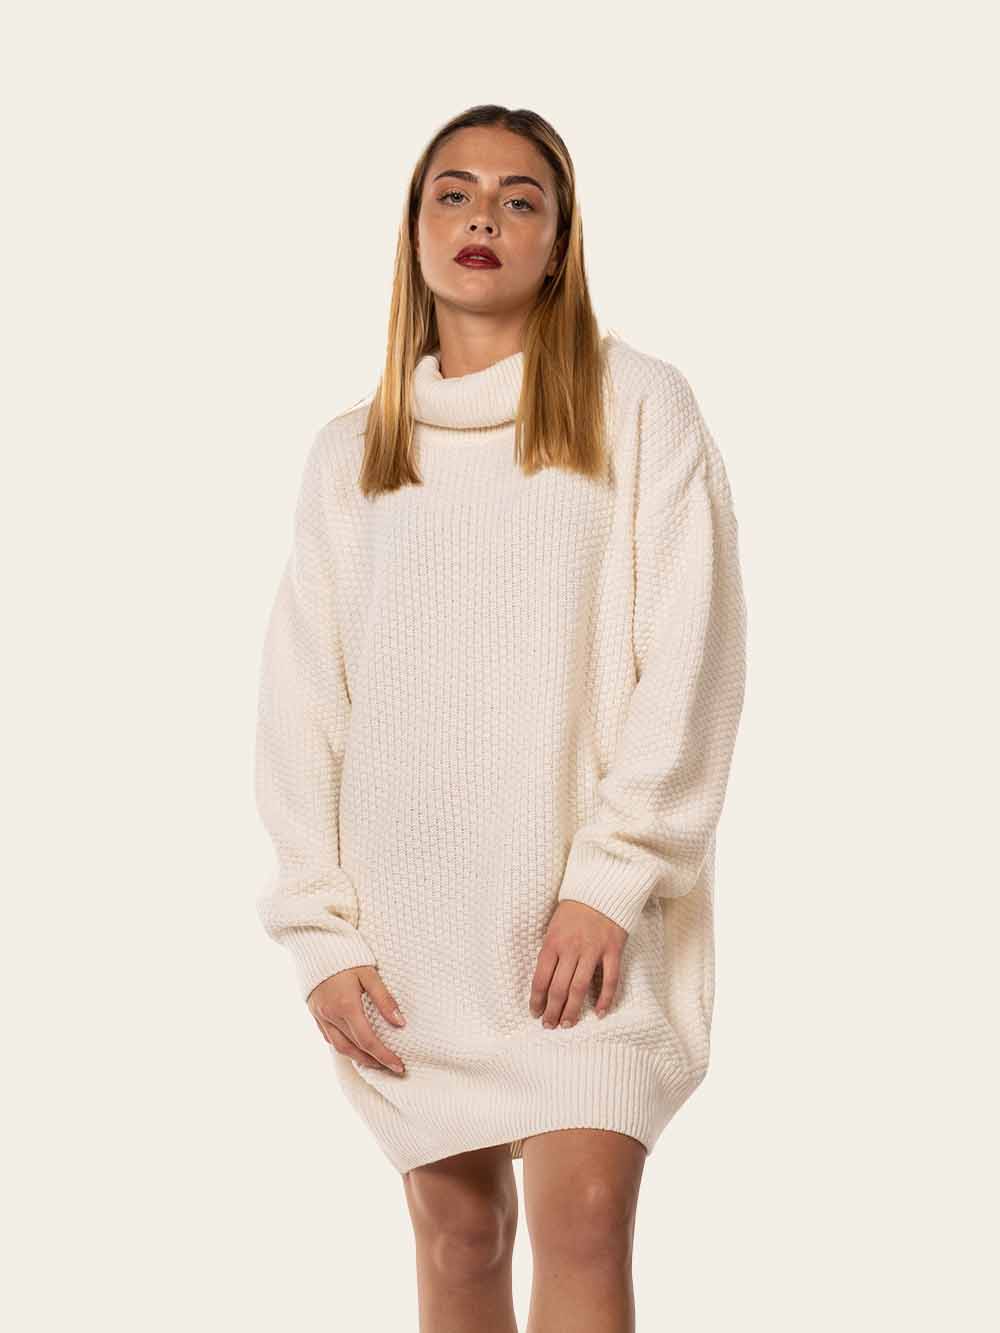 Loose white pullover